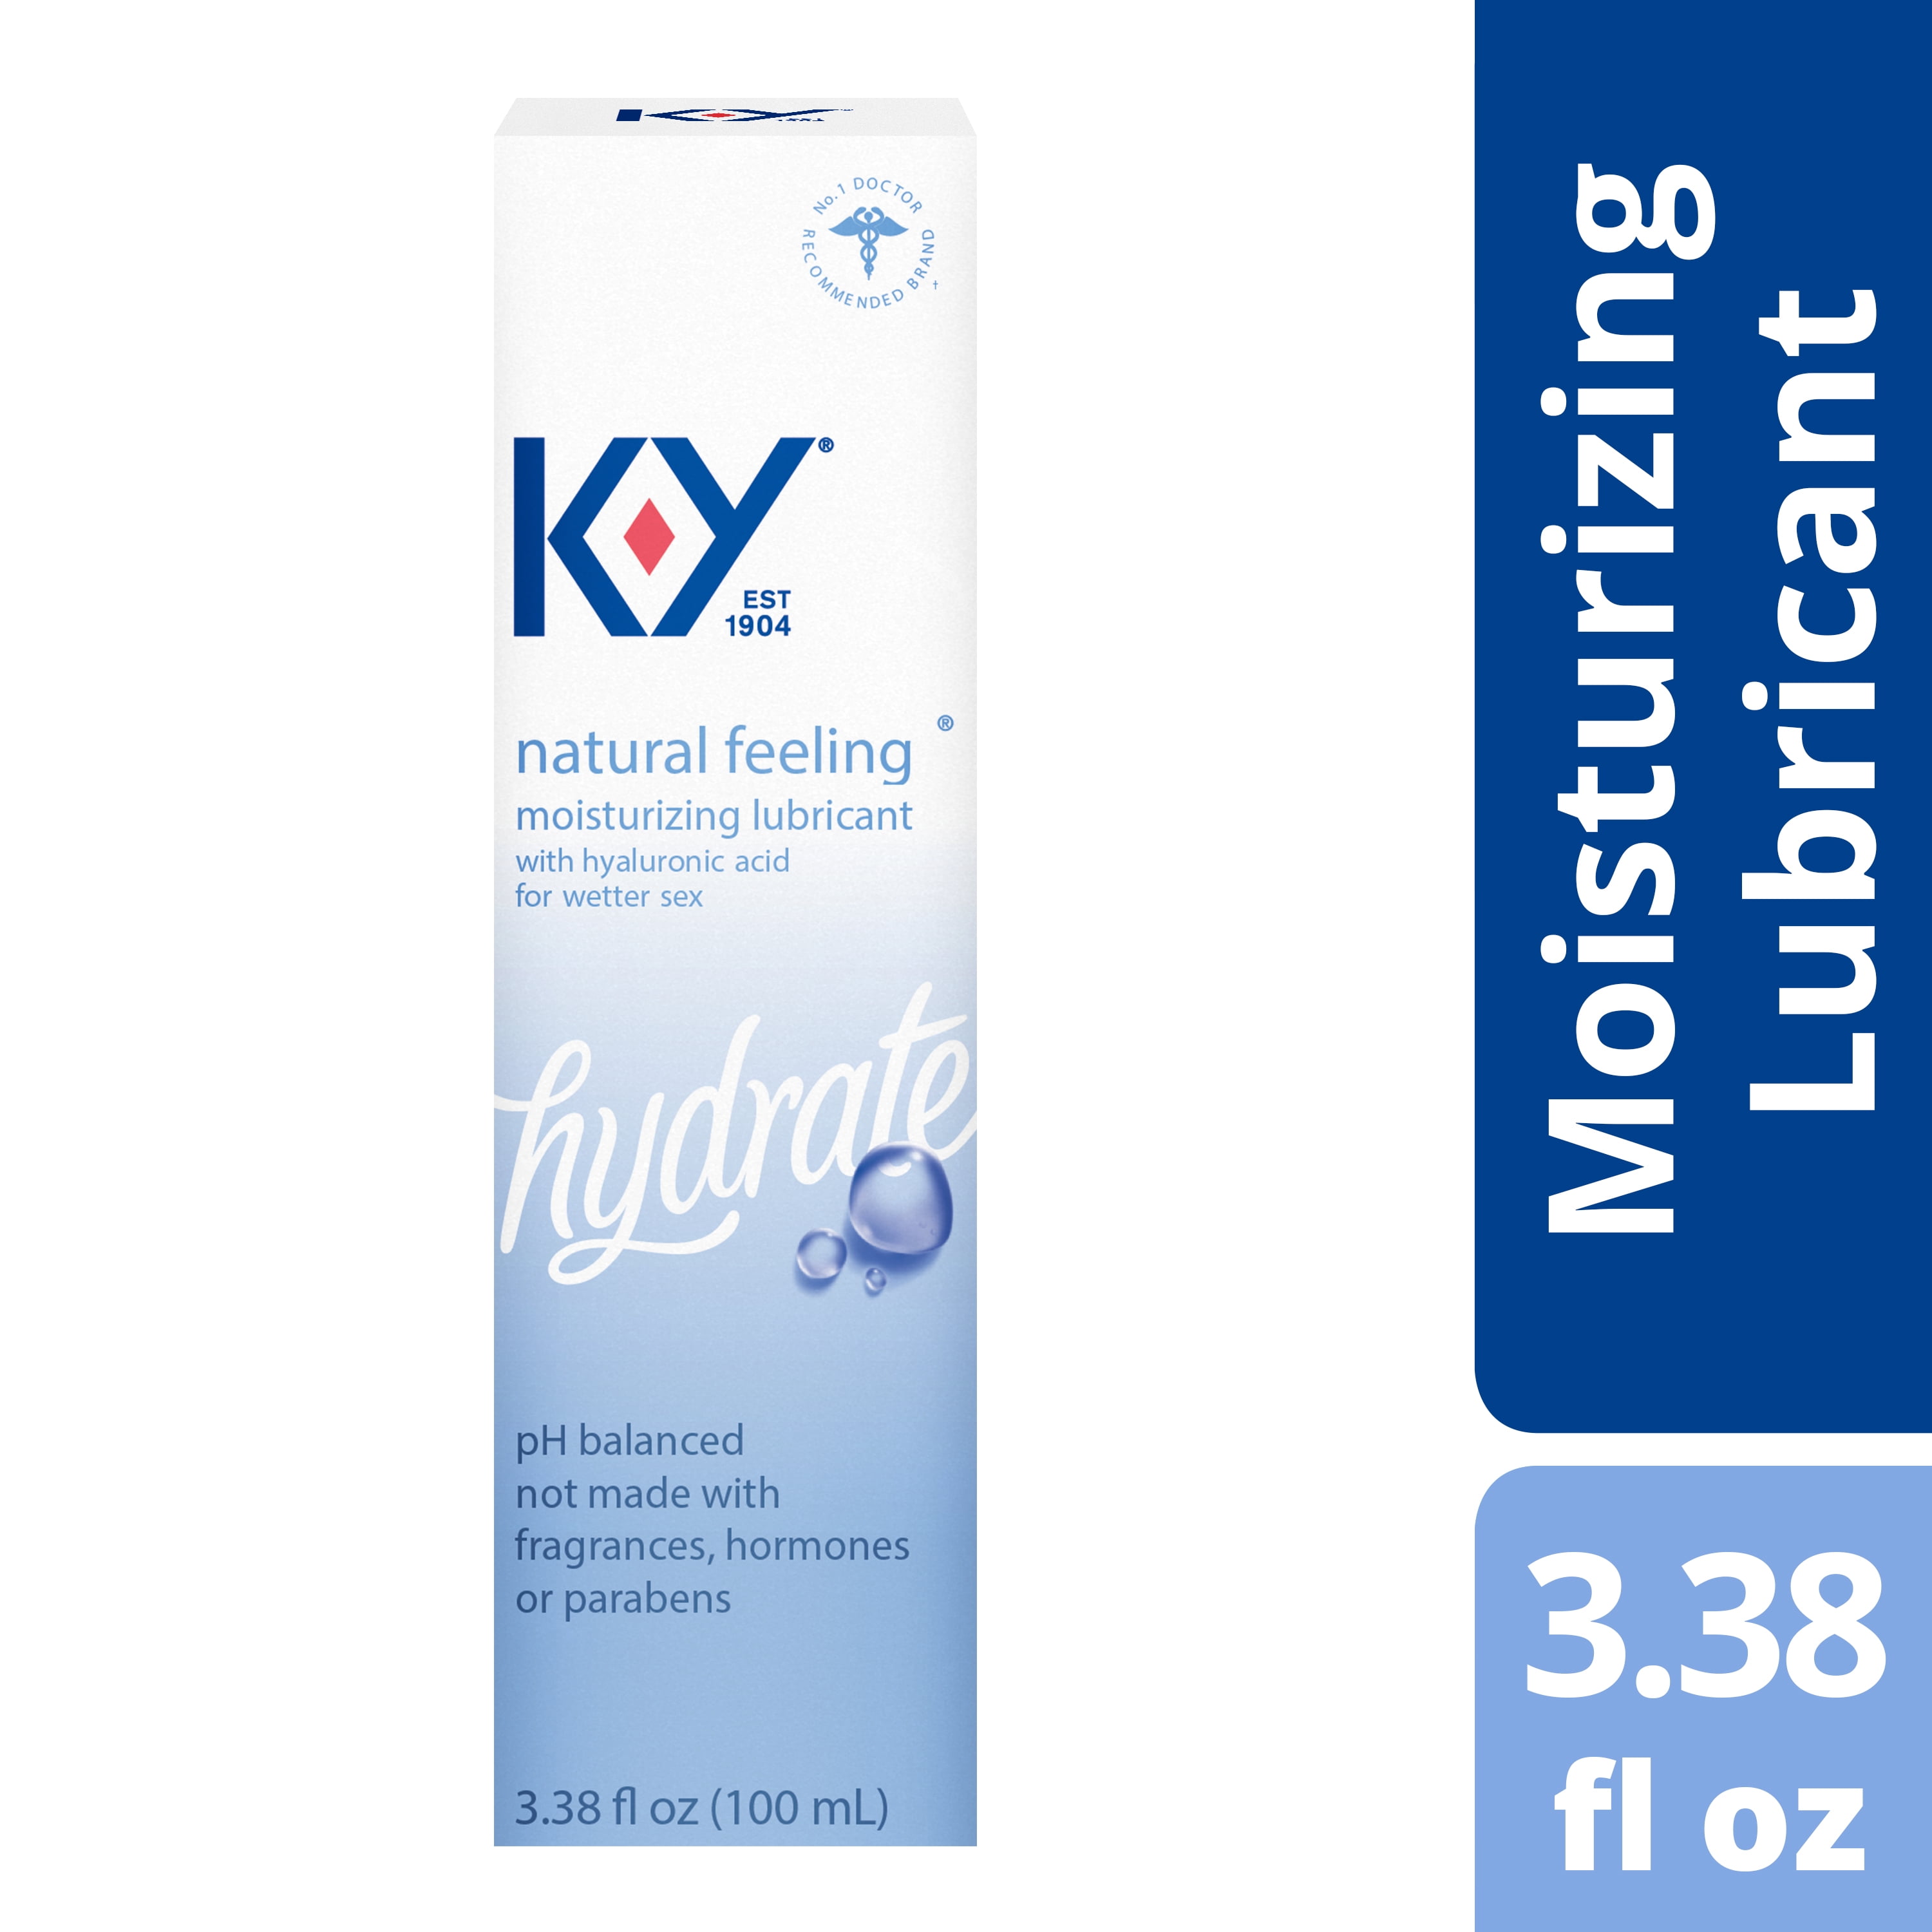 Water Based Lube K-Y Natural Feeling 3.38 fl oz Personal Lubricant for Adult Couples, Men, Women, Pleasure Enhancer, Vaginal Moisturizer, pH Balanced, Hormone and Paraben Free, Latex Condom Compatible picture